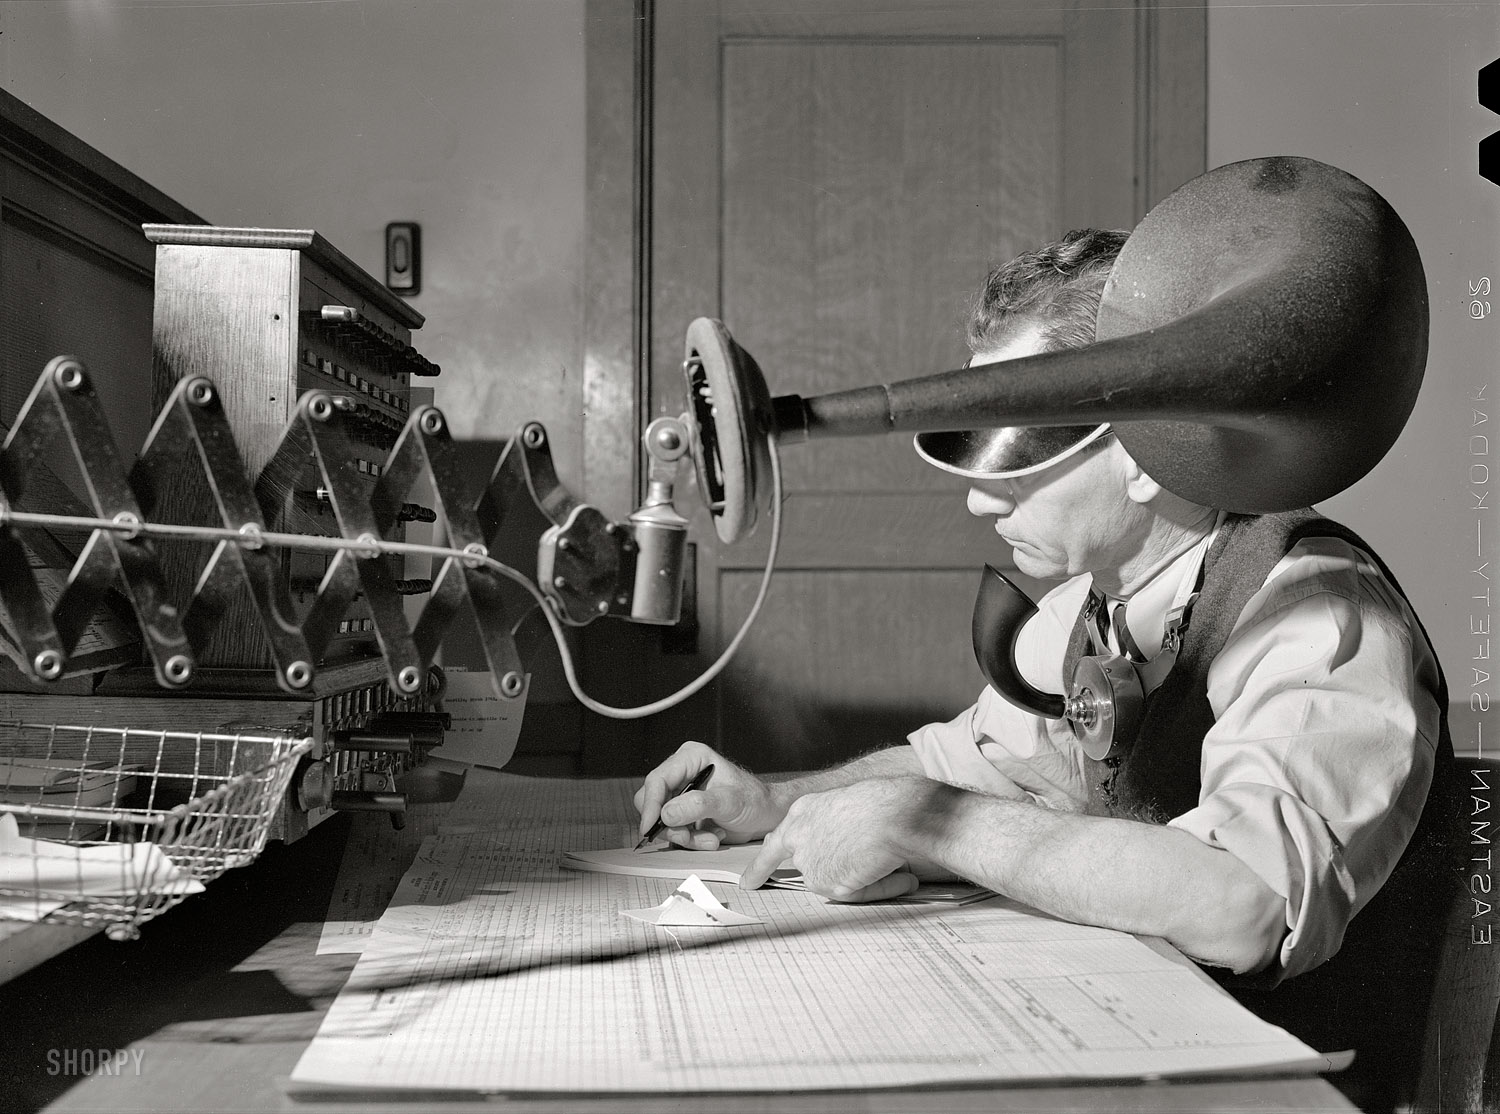 March 1943. "Amarillo, Texas. Atchison, Topeka and Santa Fe rail dispatcher in the general office." Medium-format negative by Jack Delano. View full size.